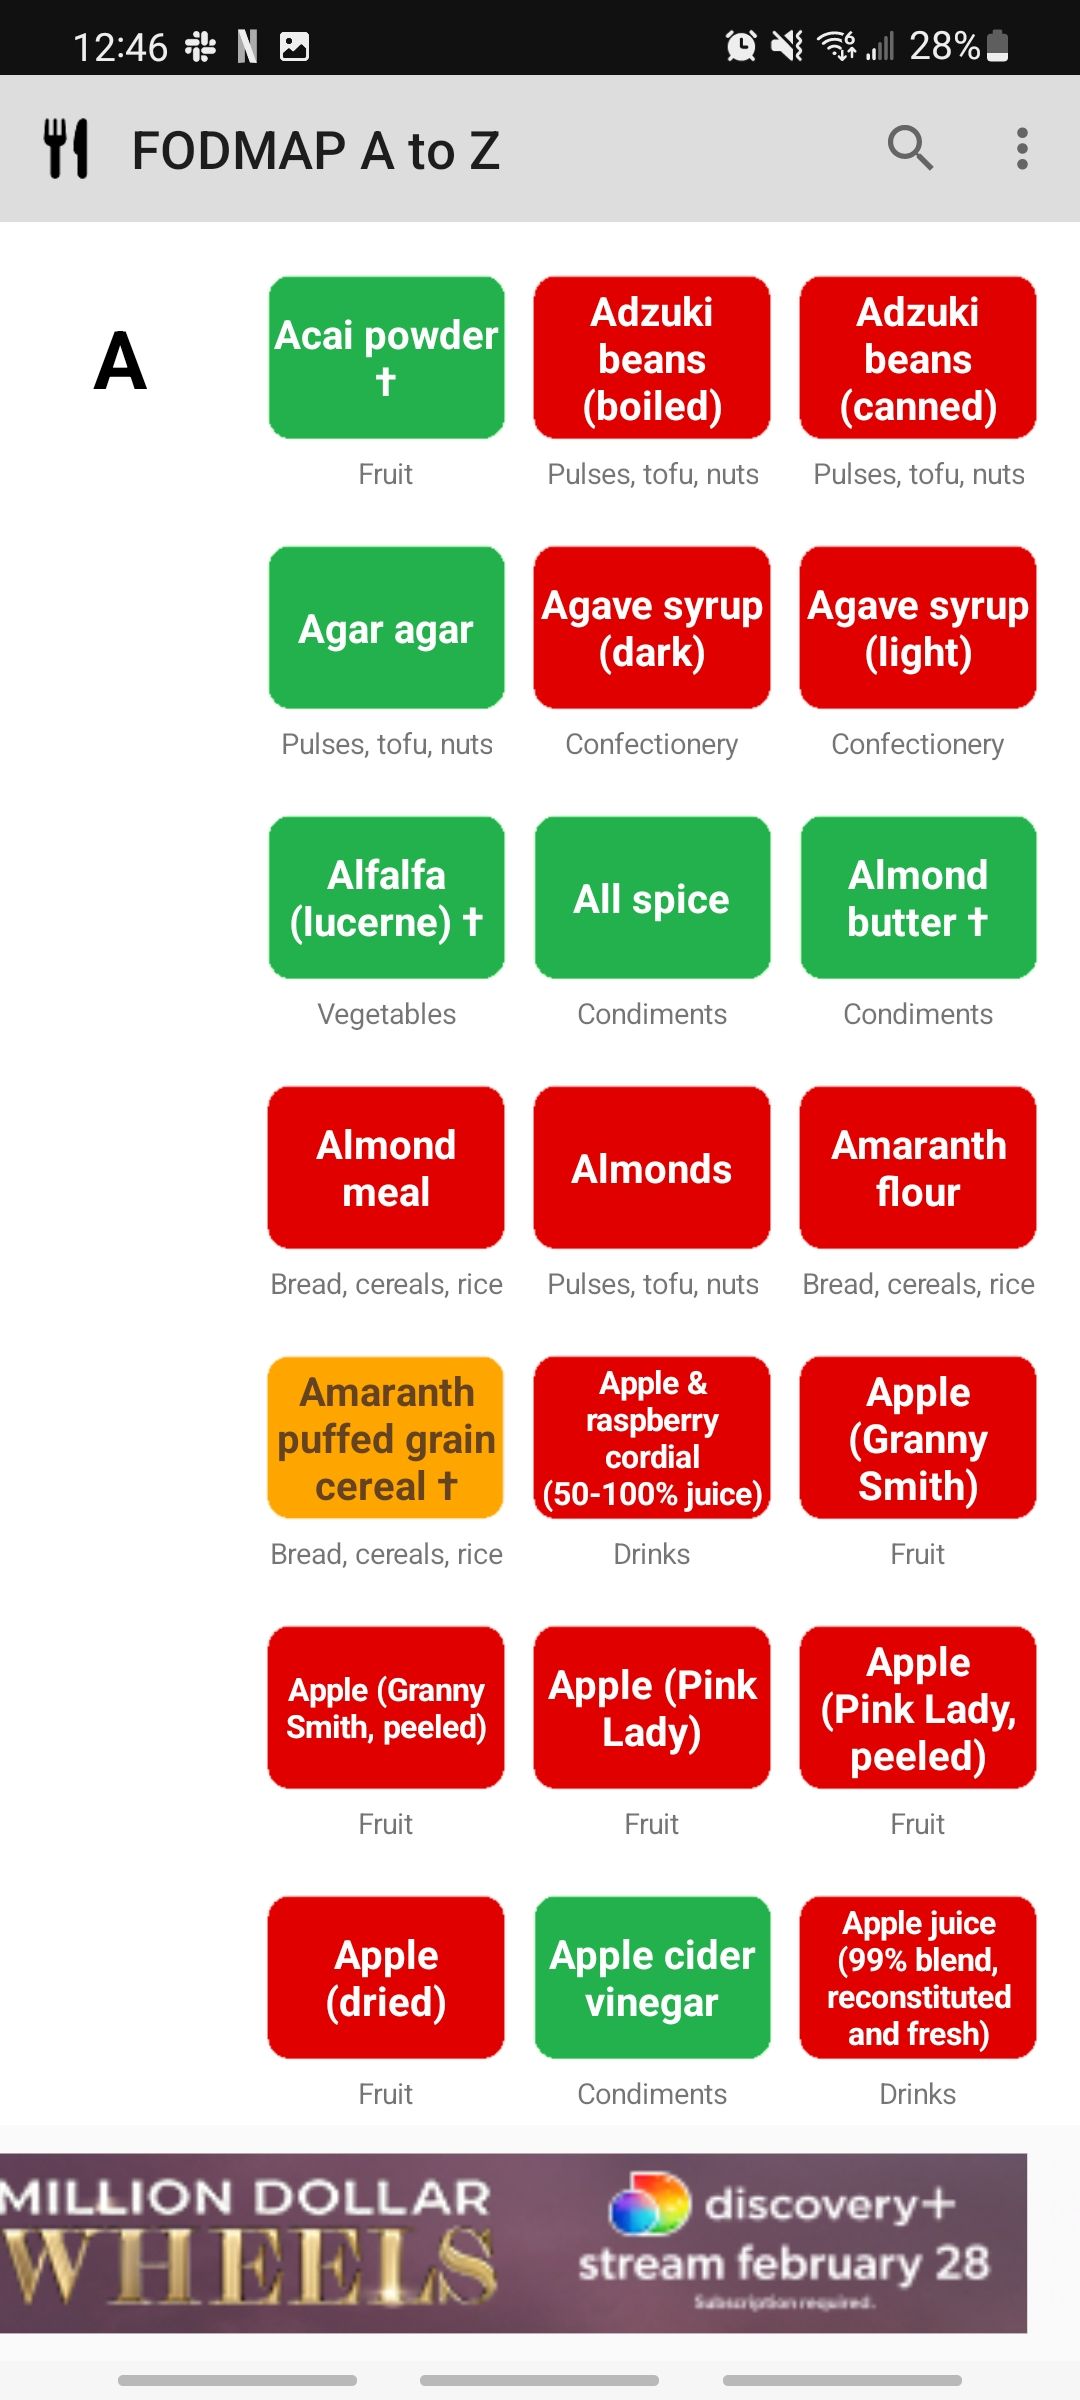 fodmap a to z app displaying all foods with a ranking